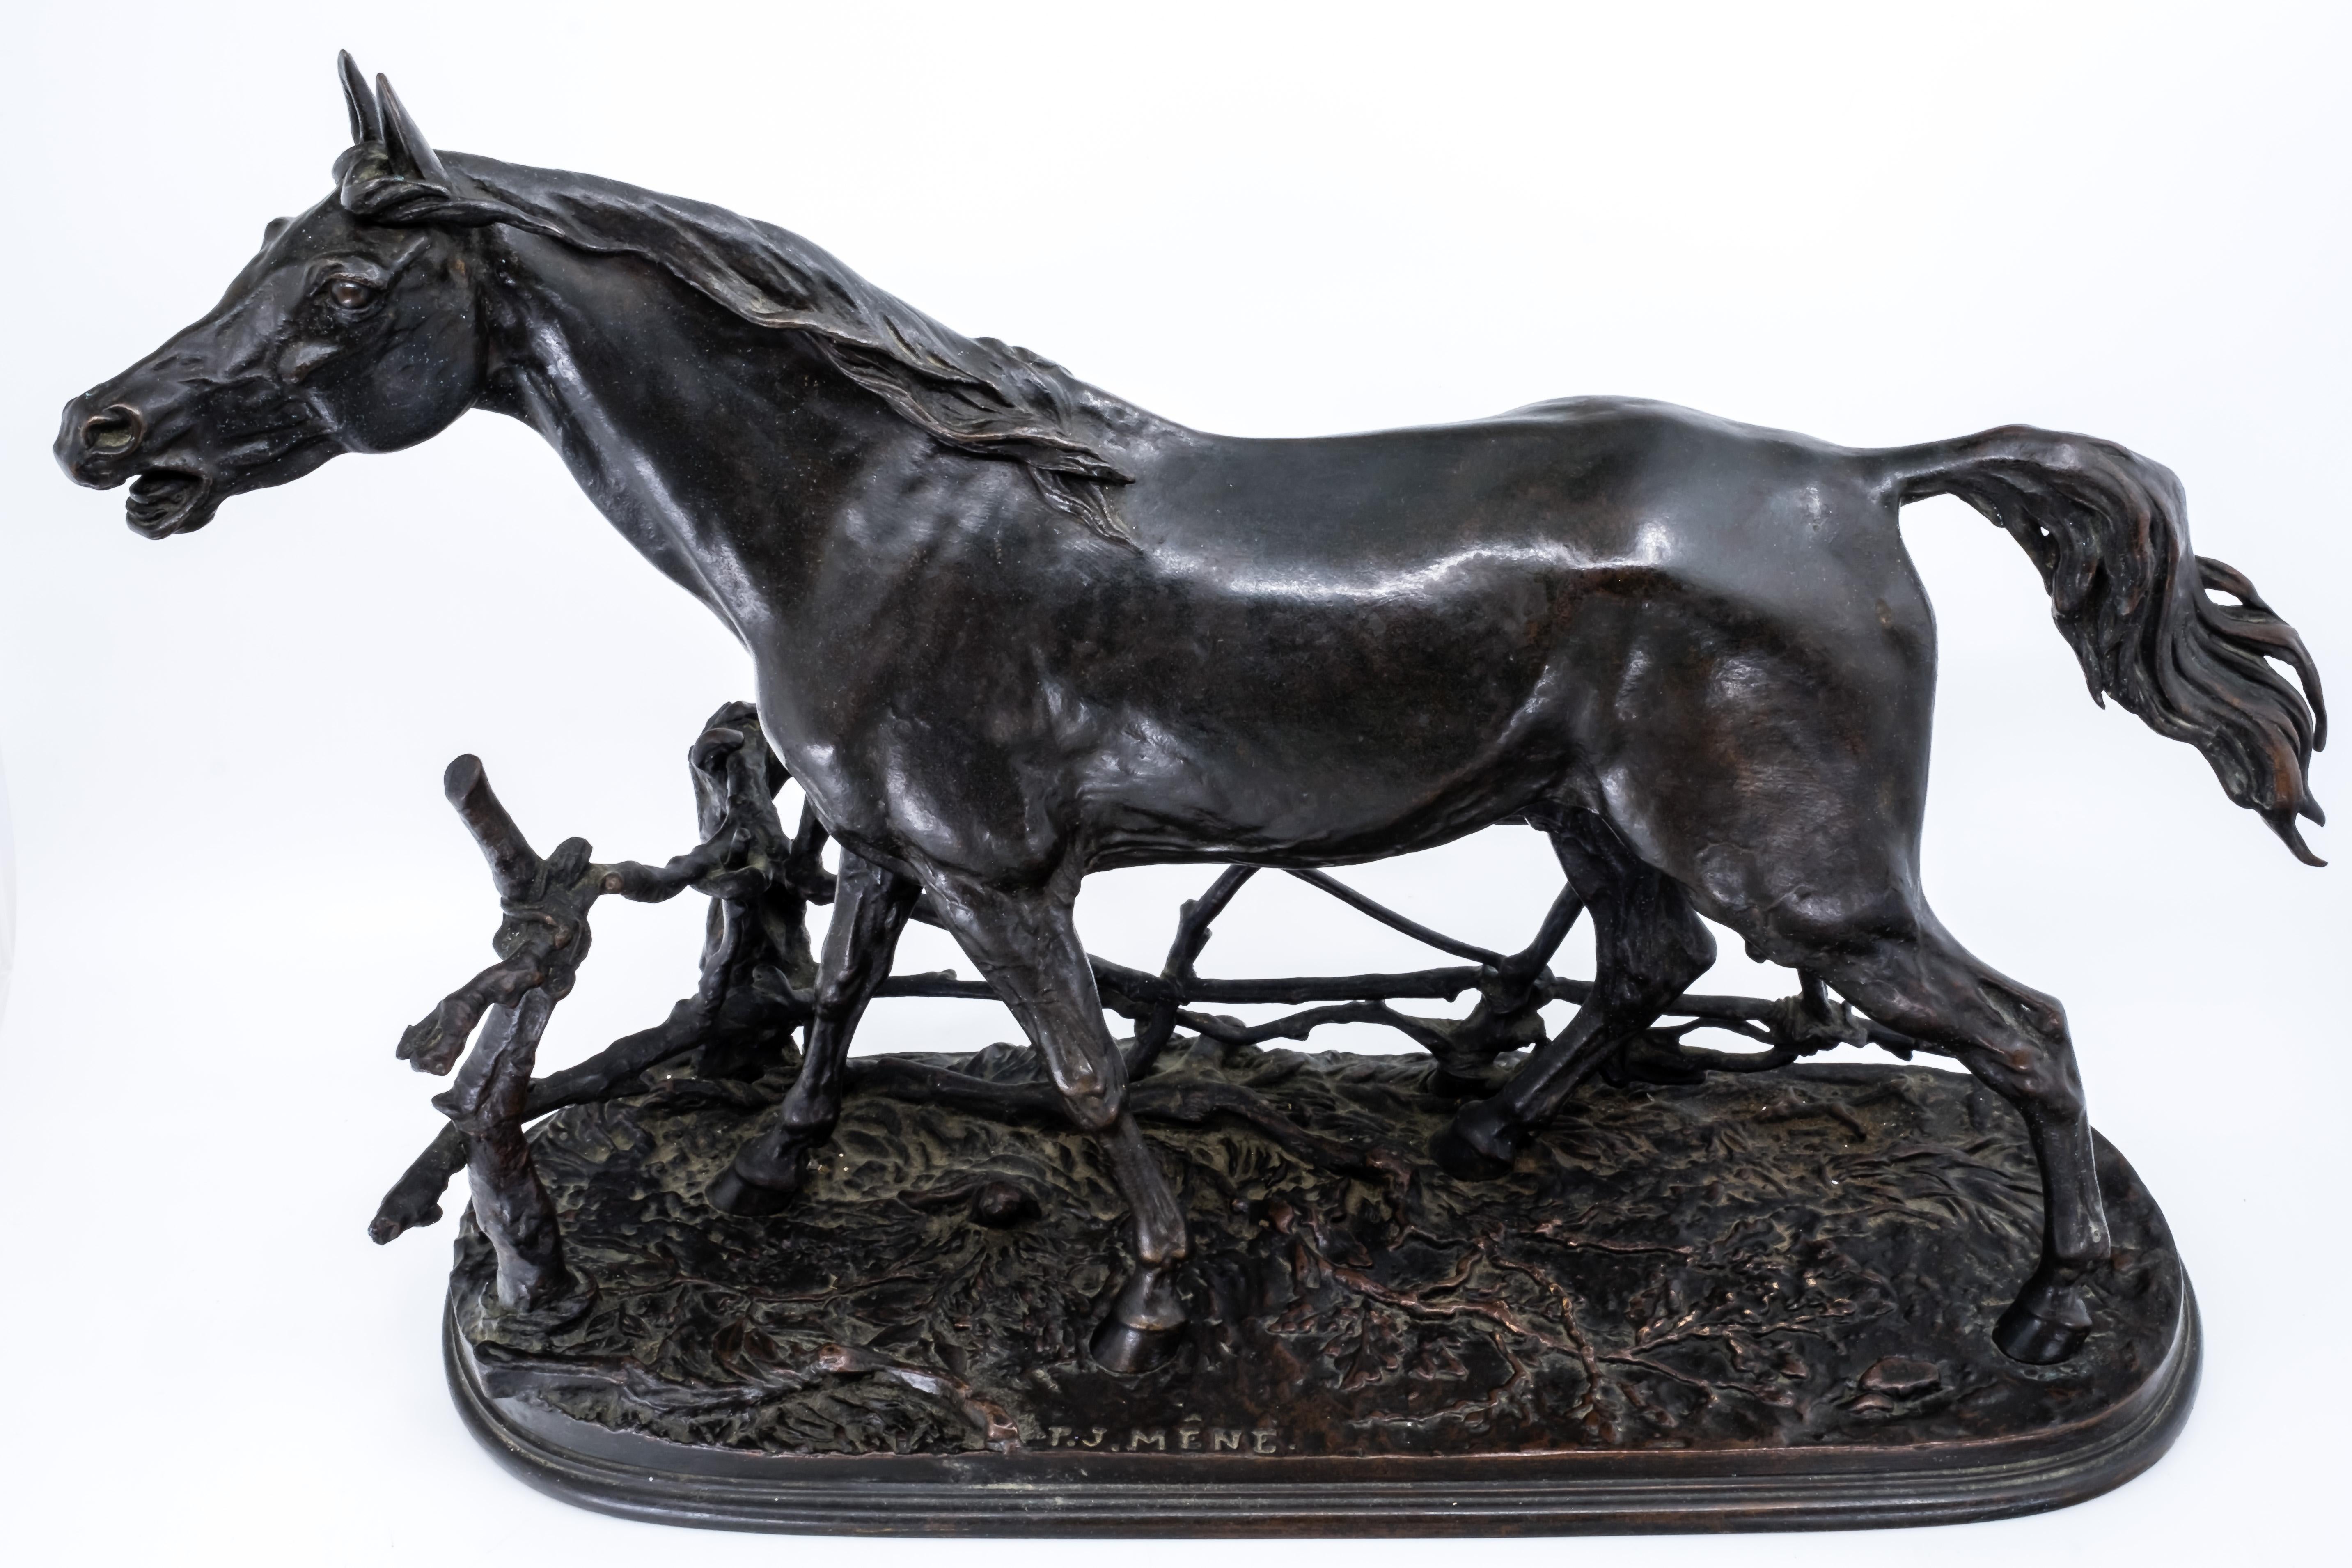 Caning Mene, Bronze Figure of a Horse, French Late 19th Century